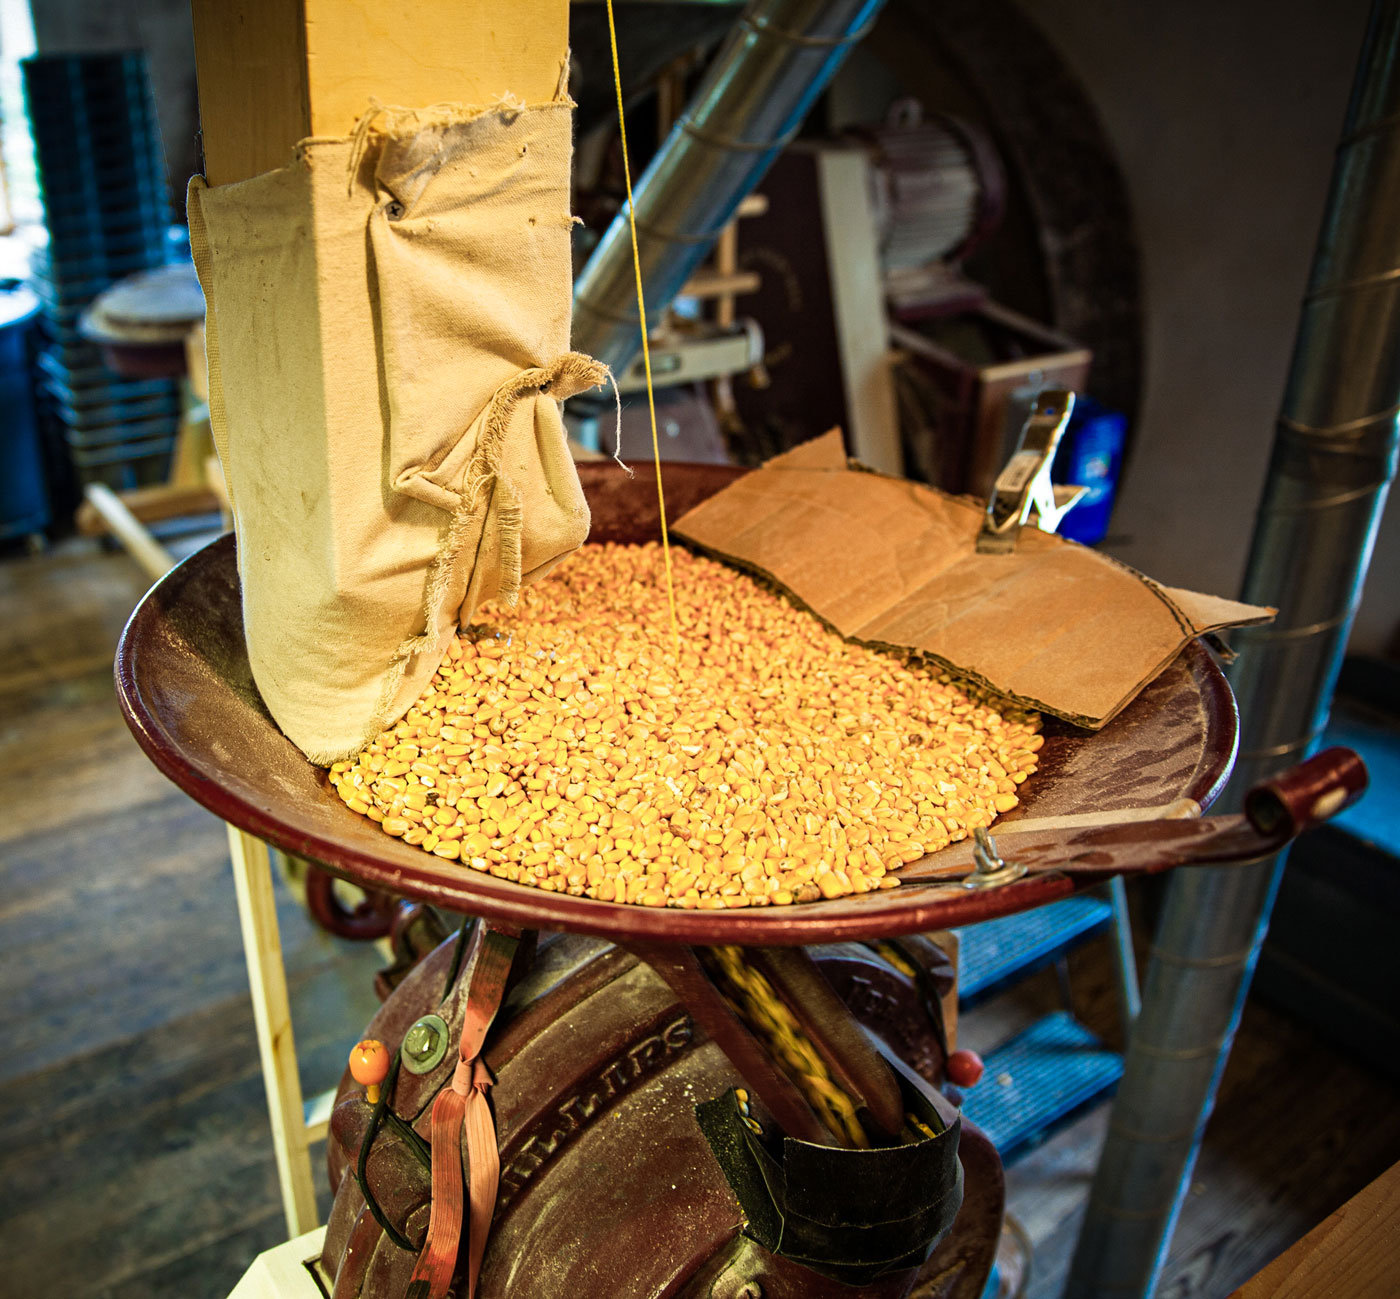 A bag of grain poured into a metal grain mill grinder.